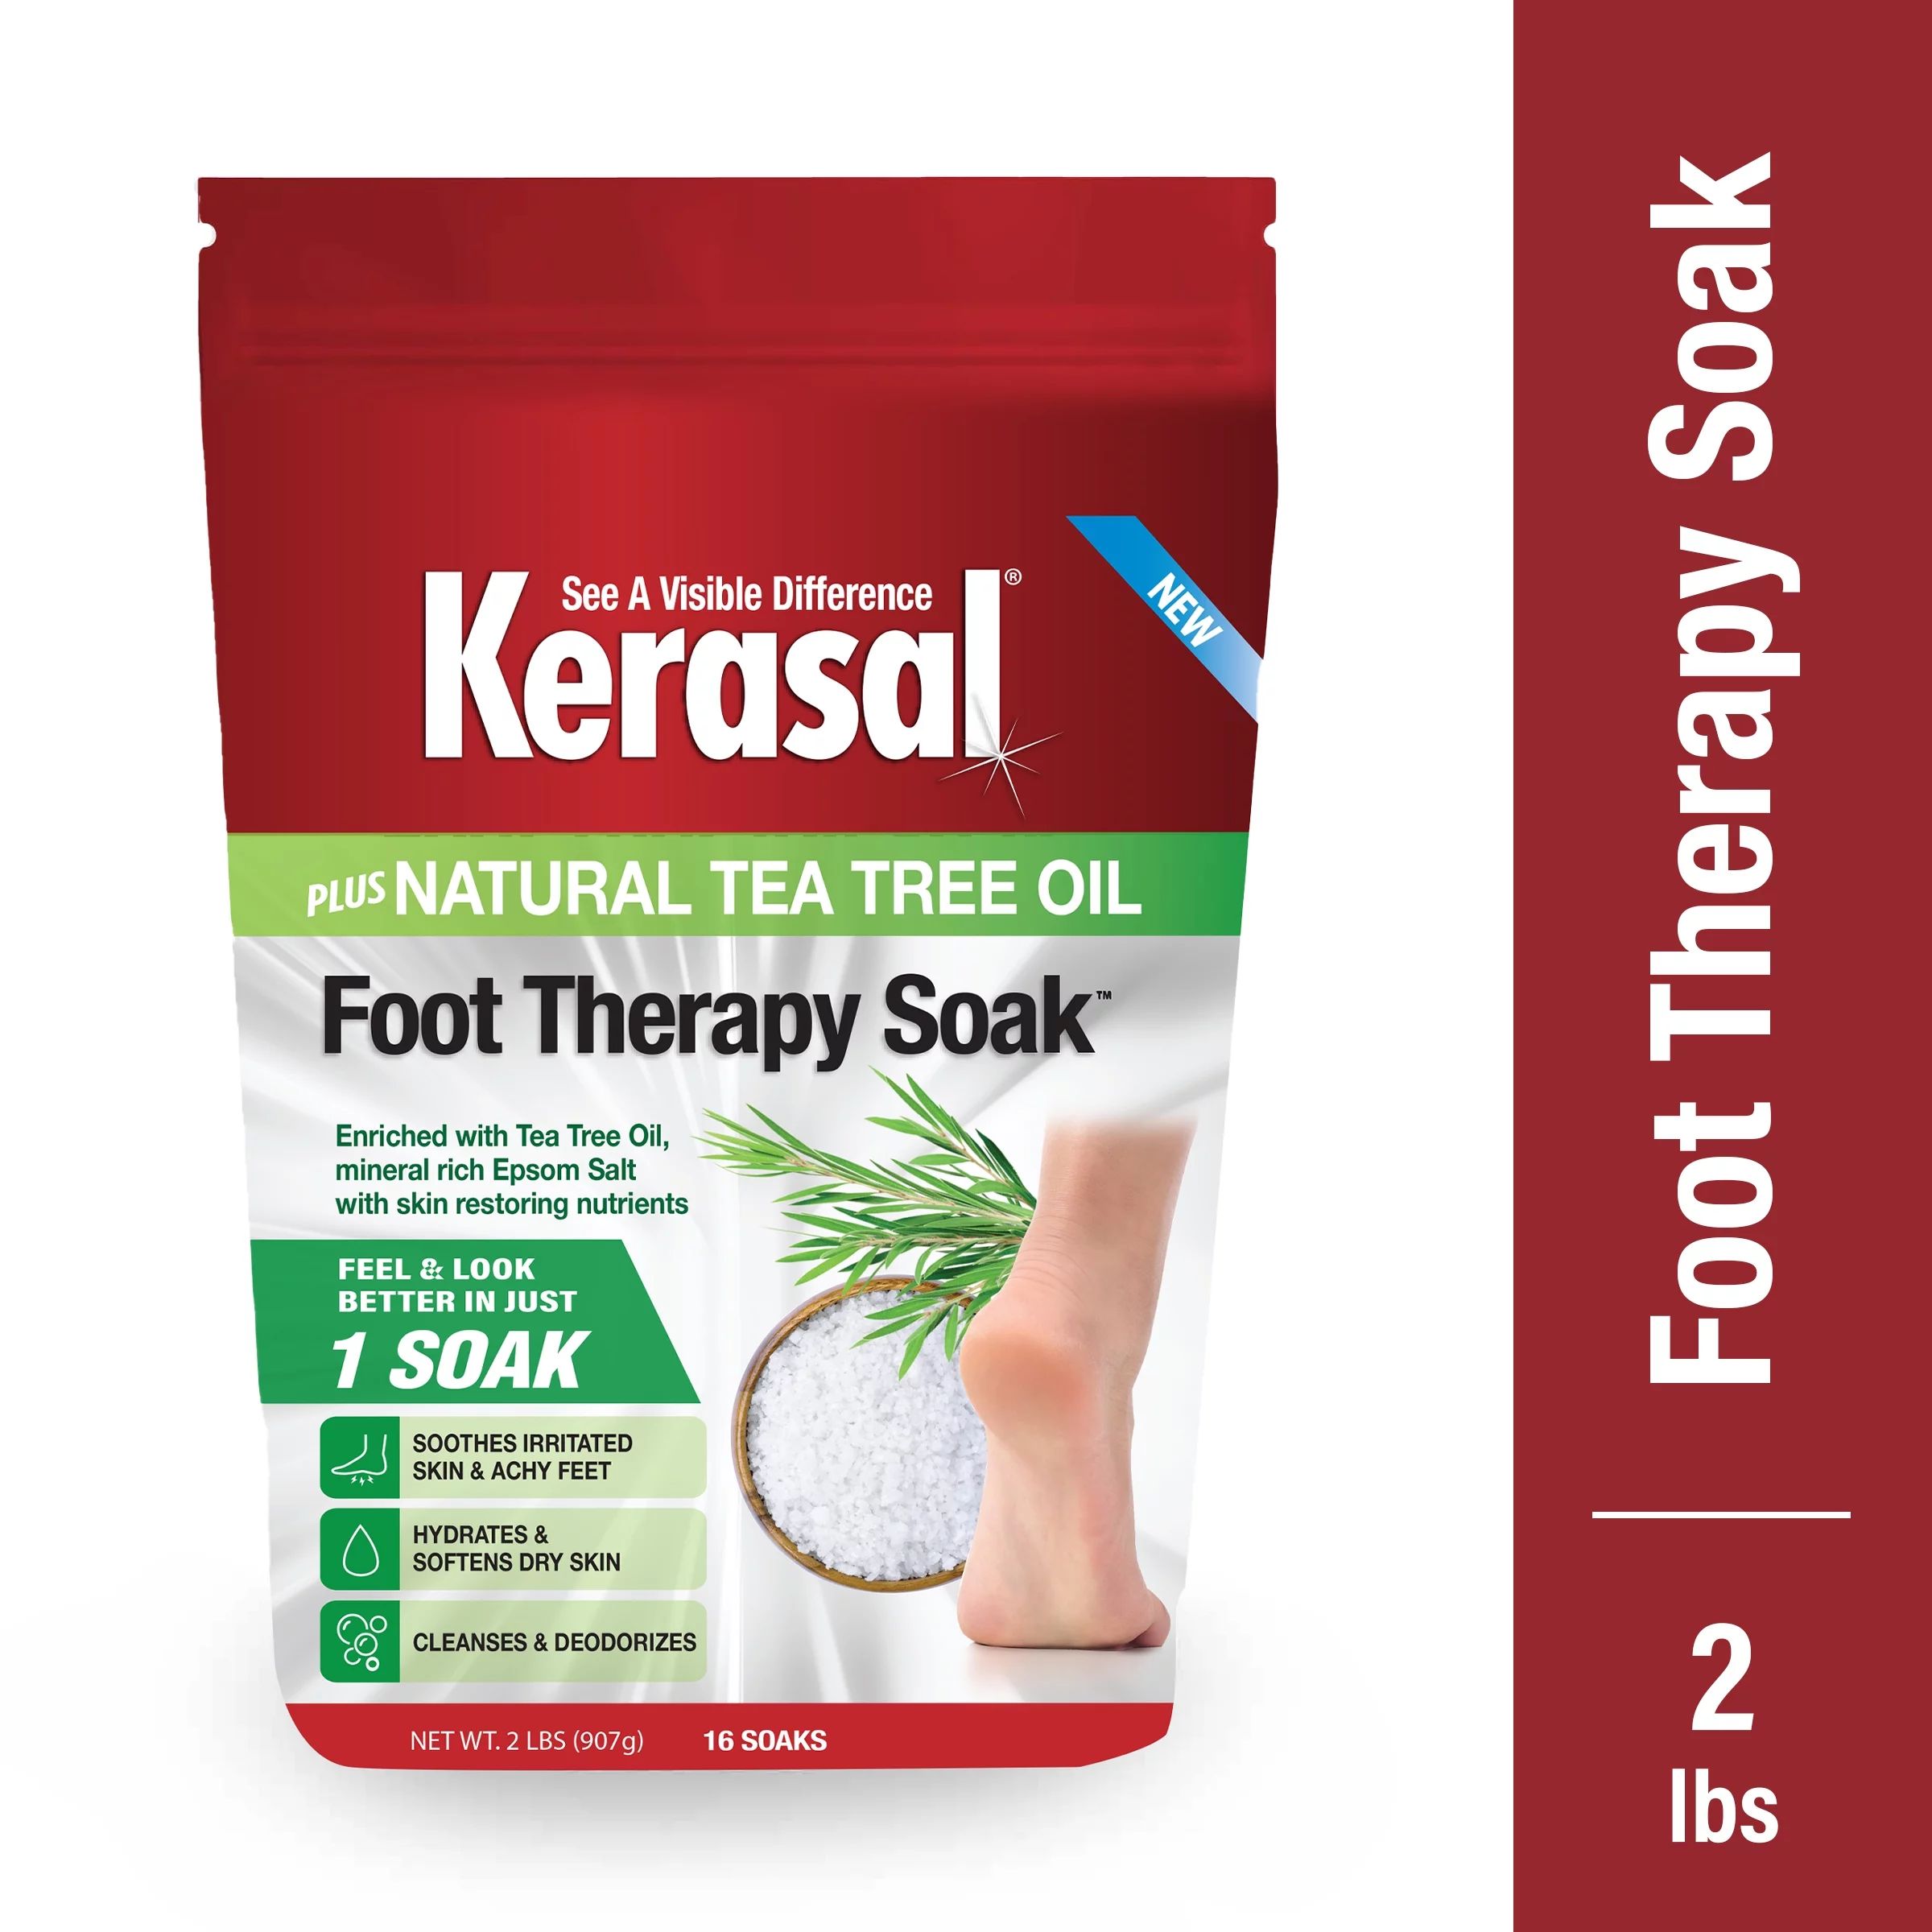 Kerasal Foot Therapy Soak, Foot Soak for Achy, Tired and Dry feet, 2 lbs | Walmart (US)